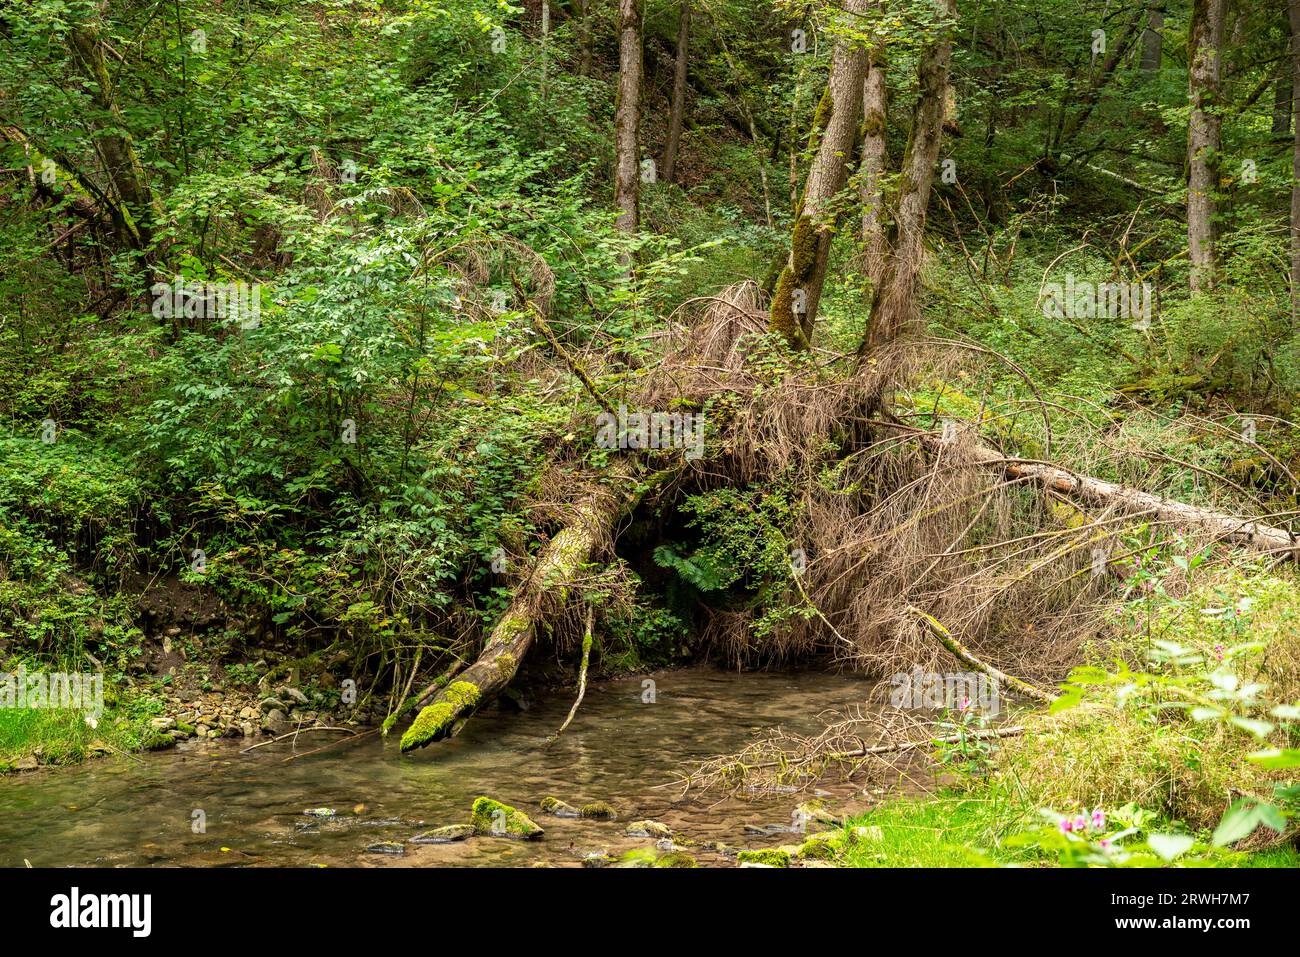 Fallen tree in the Gauchach River in the Gauchach Gorge in the Black Forest Stock Photo